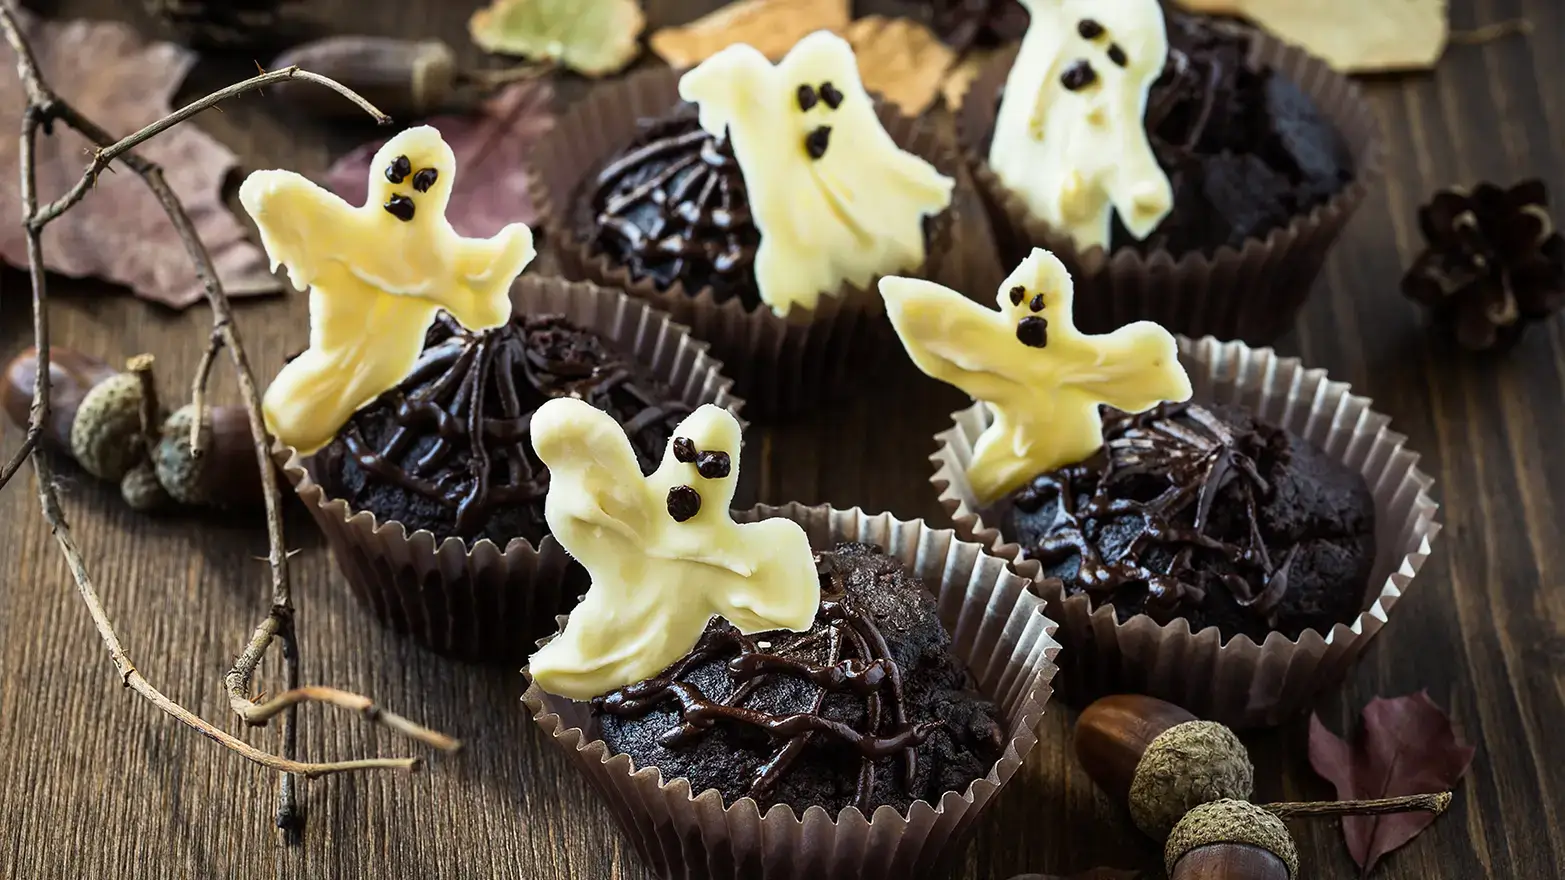 Chocolate cupcakes with white chocolate ghosts
